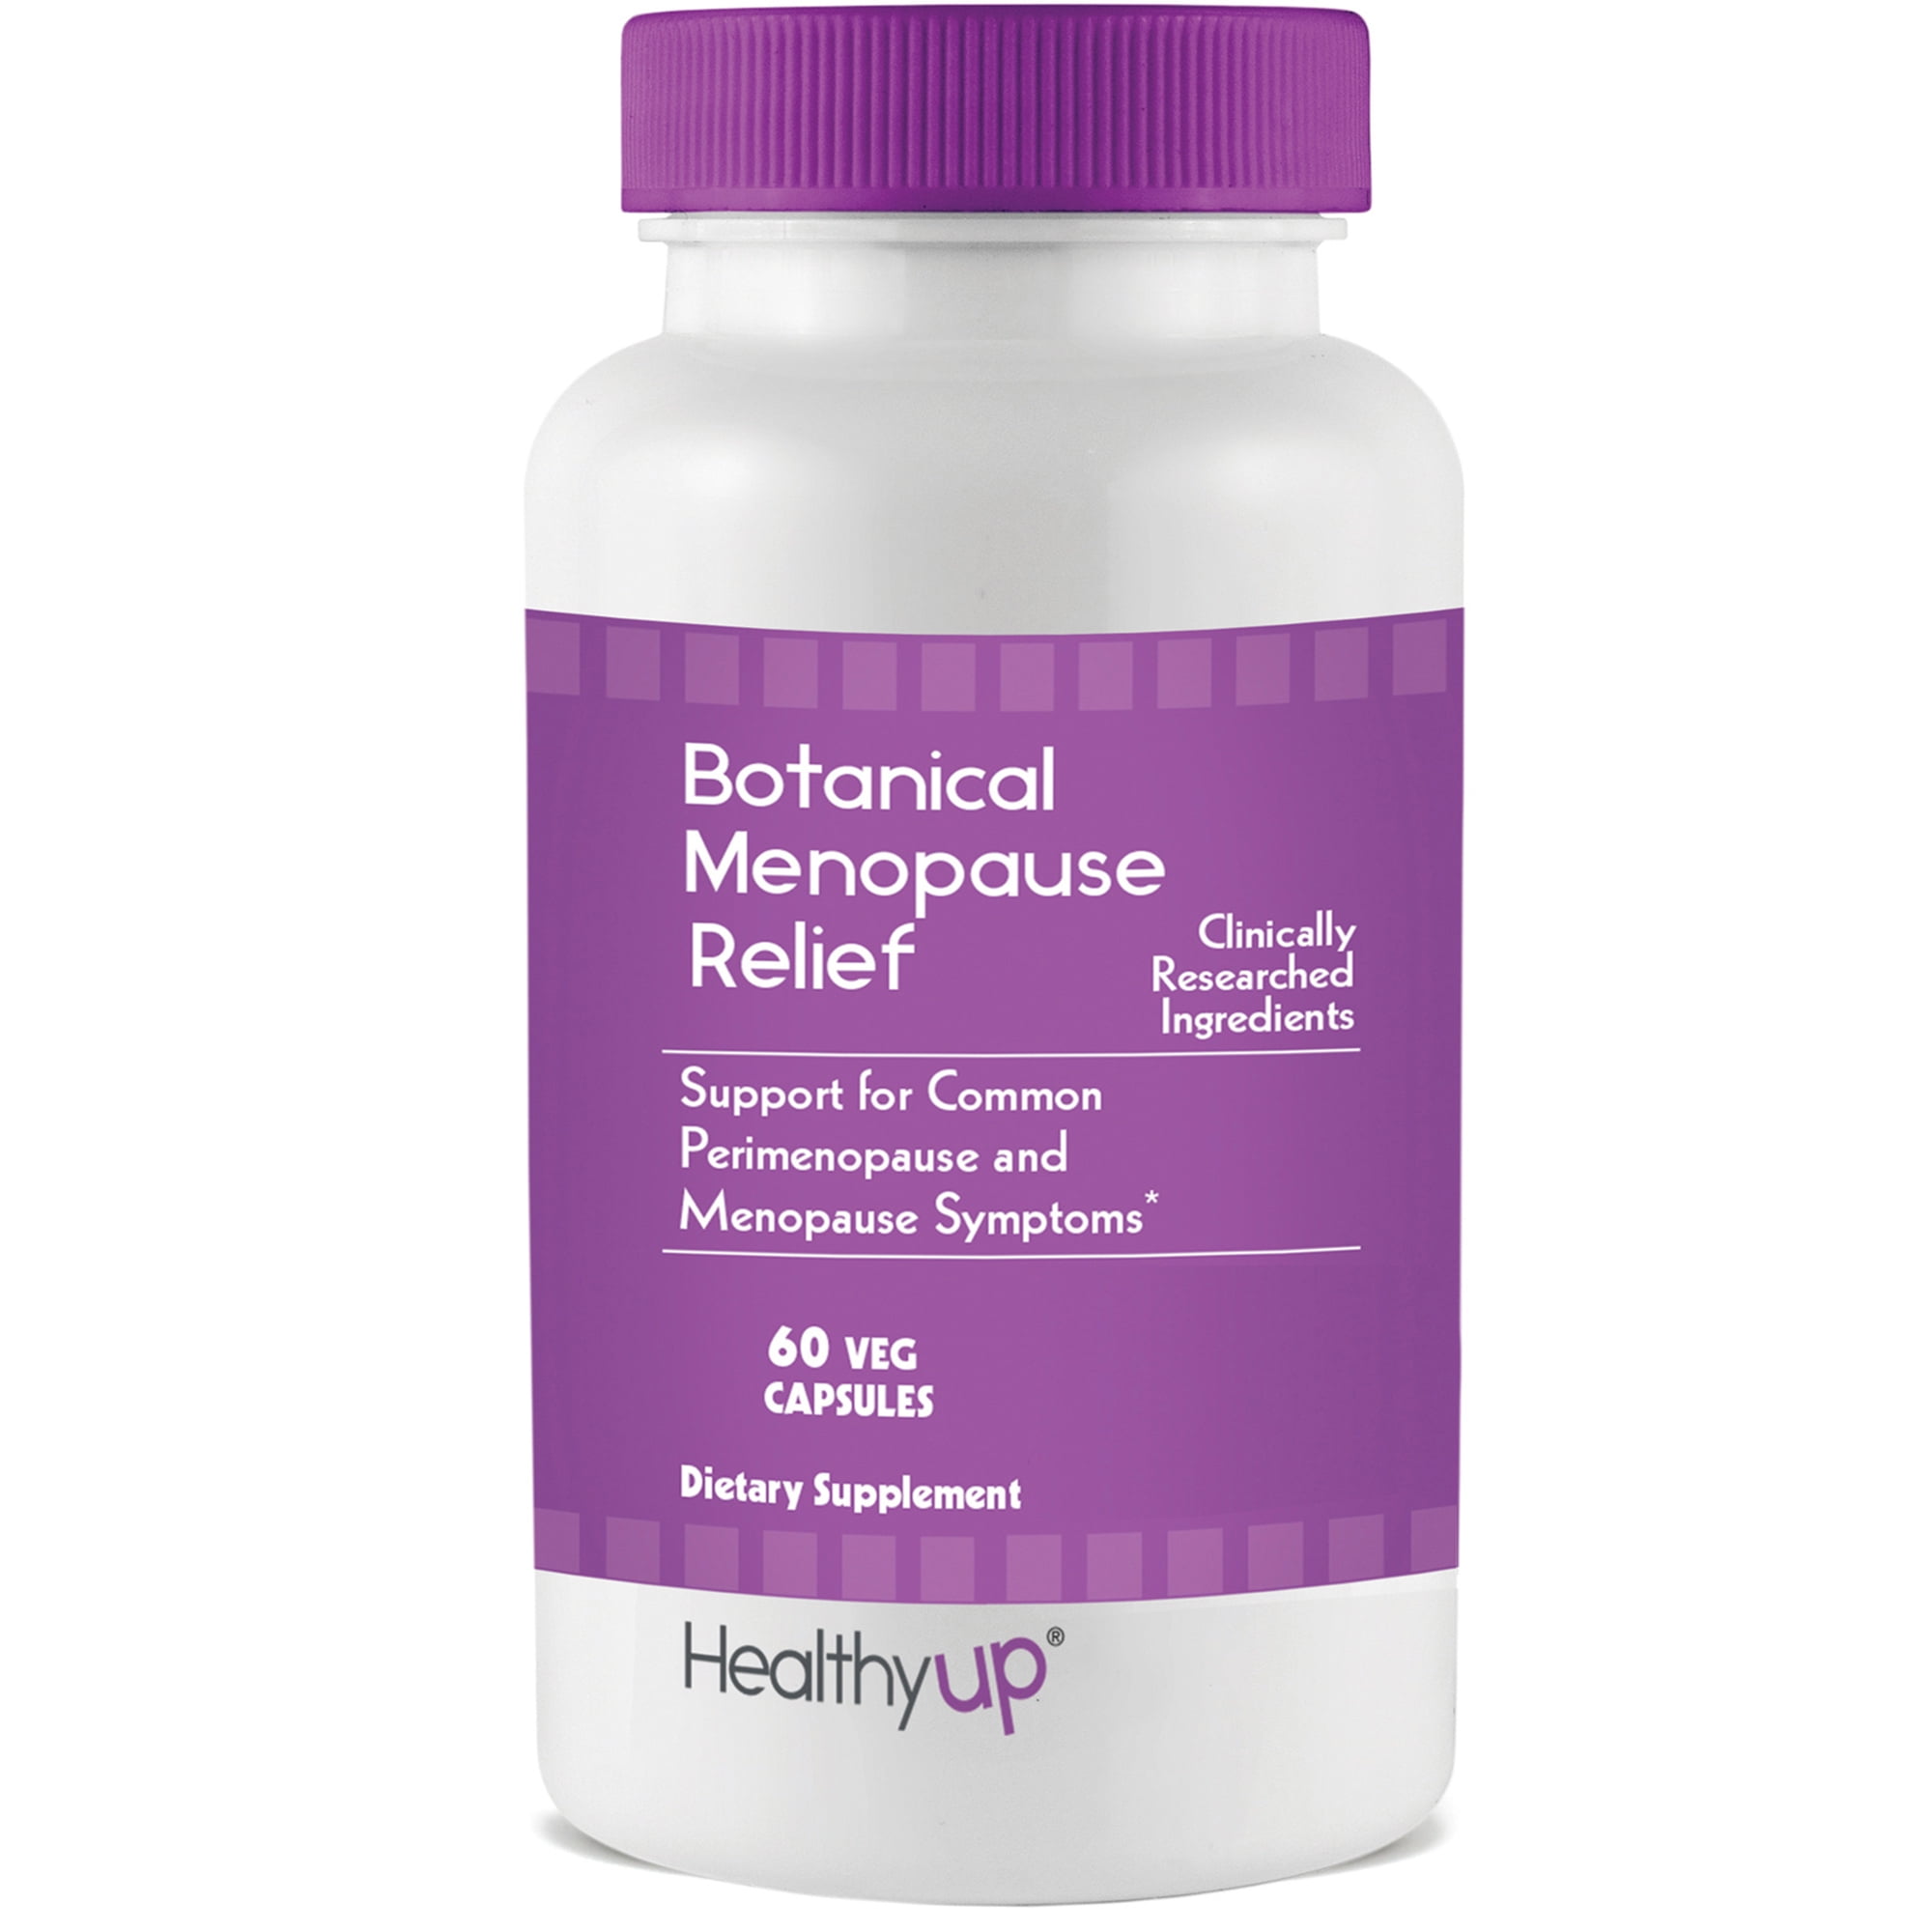 Healthyup Natural Menopause Relief Supplement 60 Veg Capsules Great For Night Sweats Hot 4634